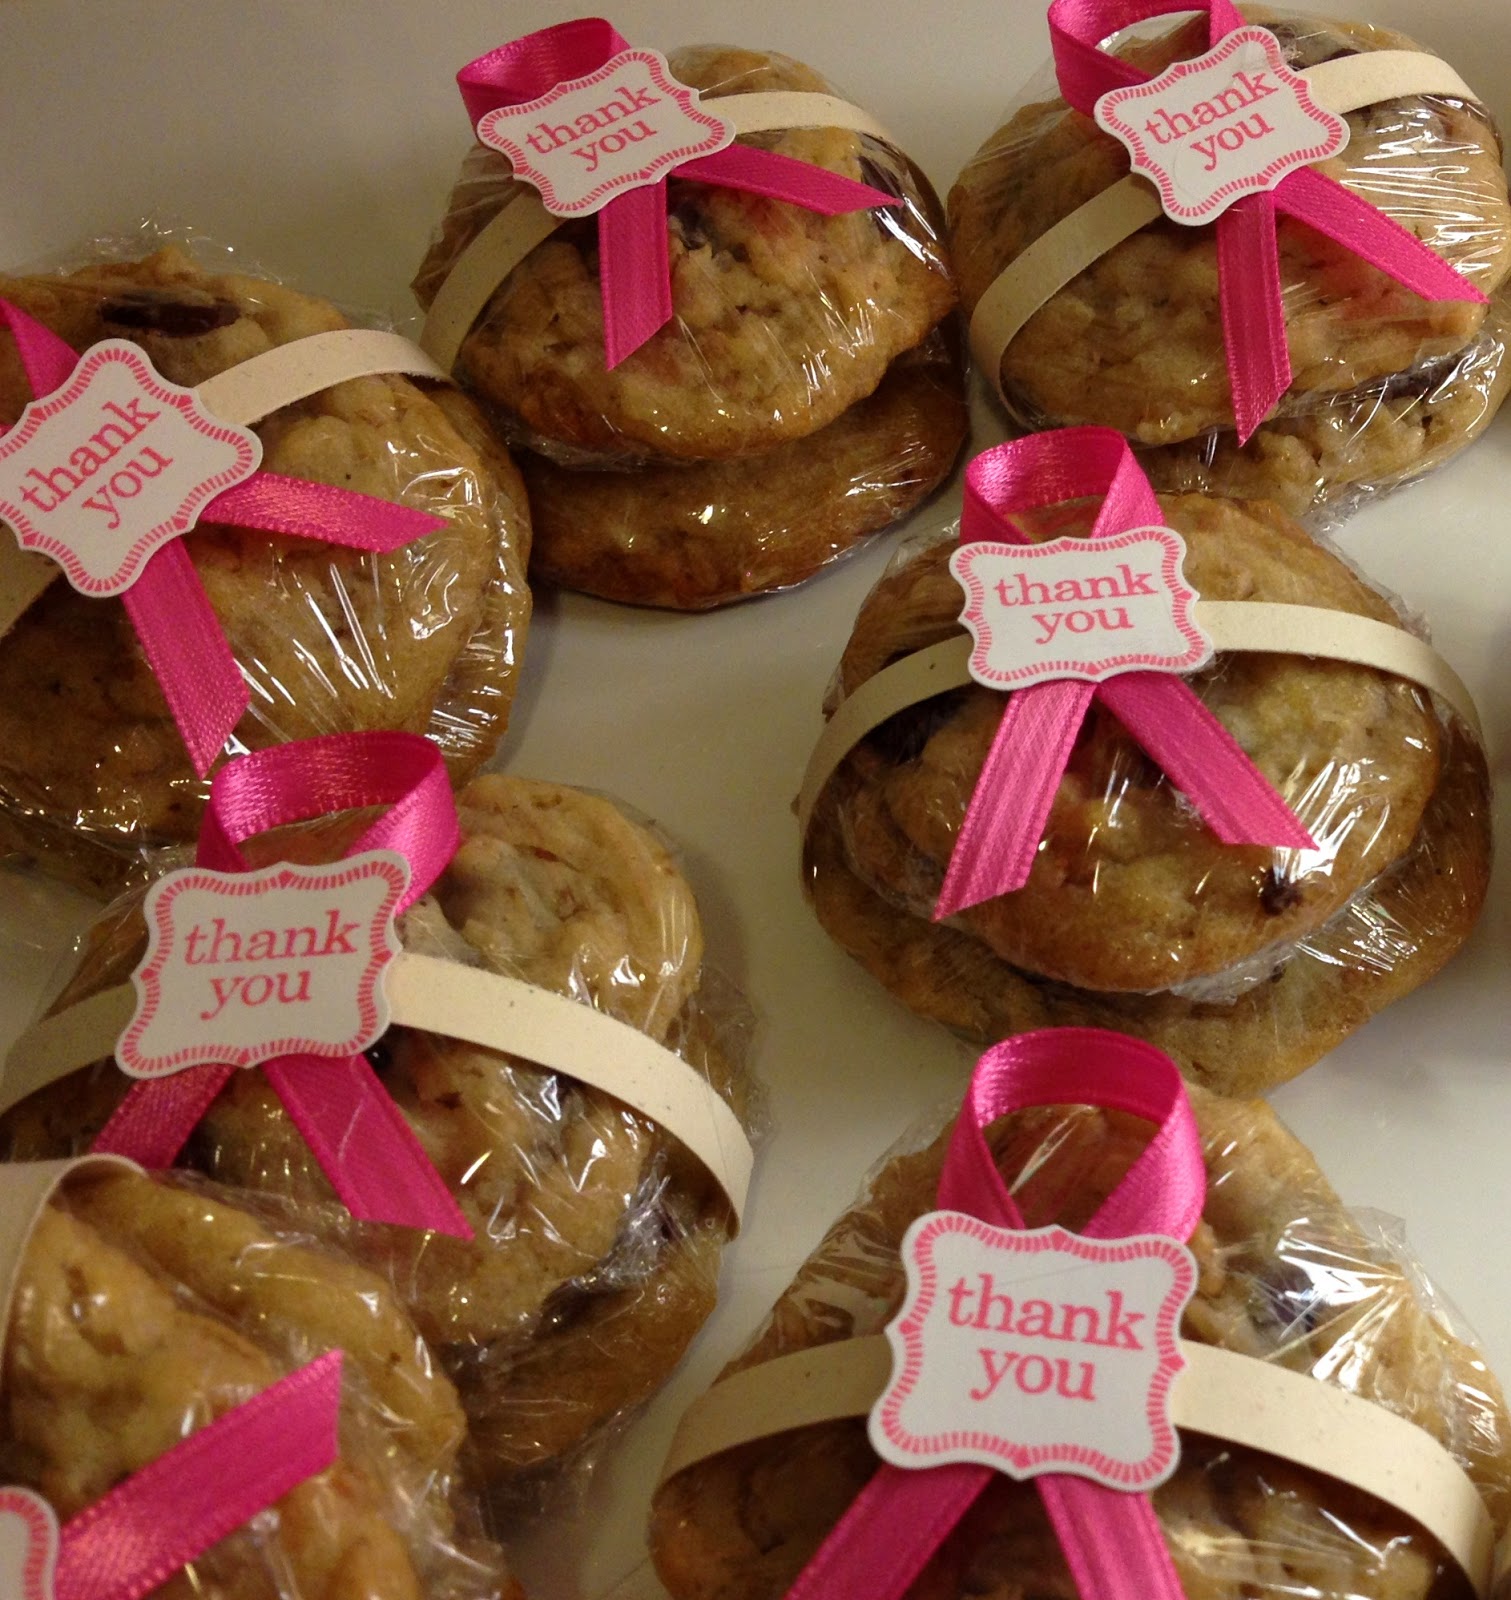 something-for-everyone-2013-breast-cancer-bake-sale